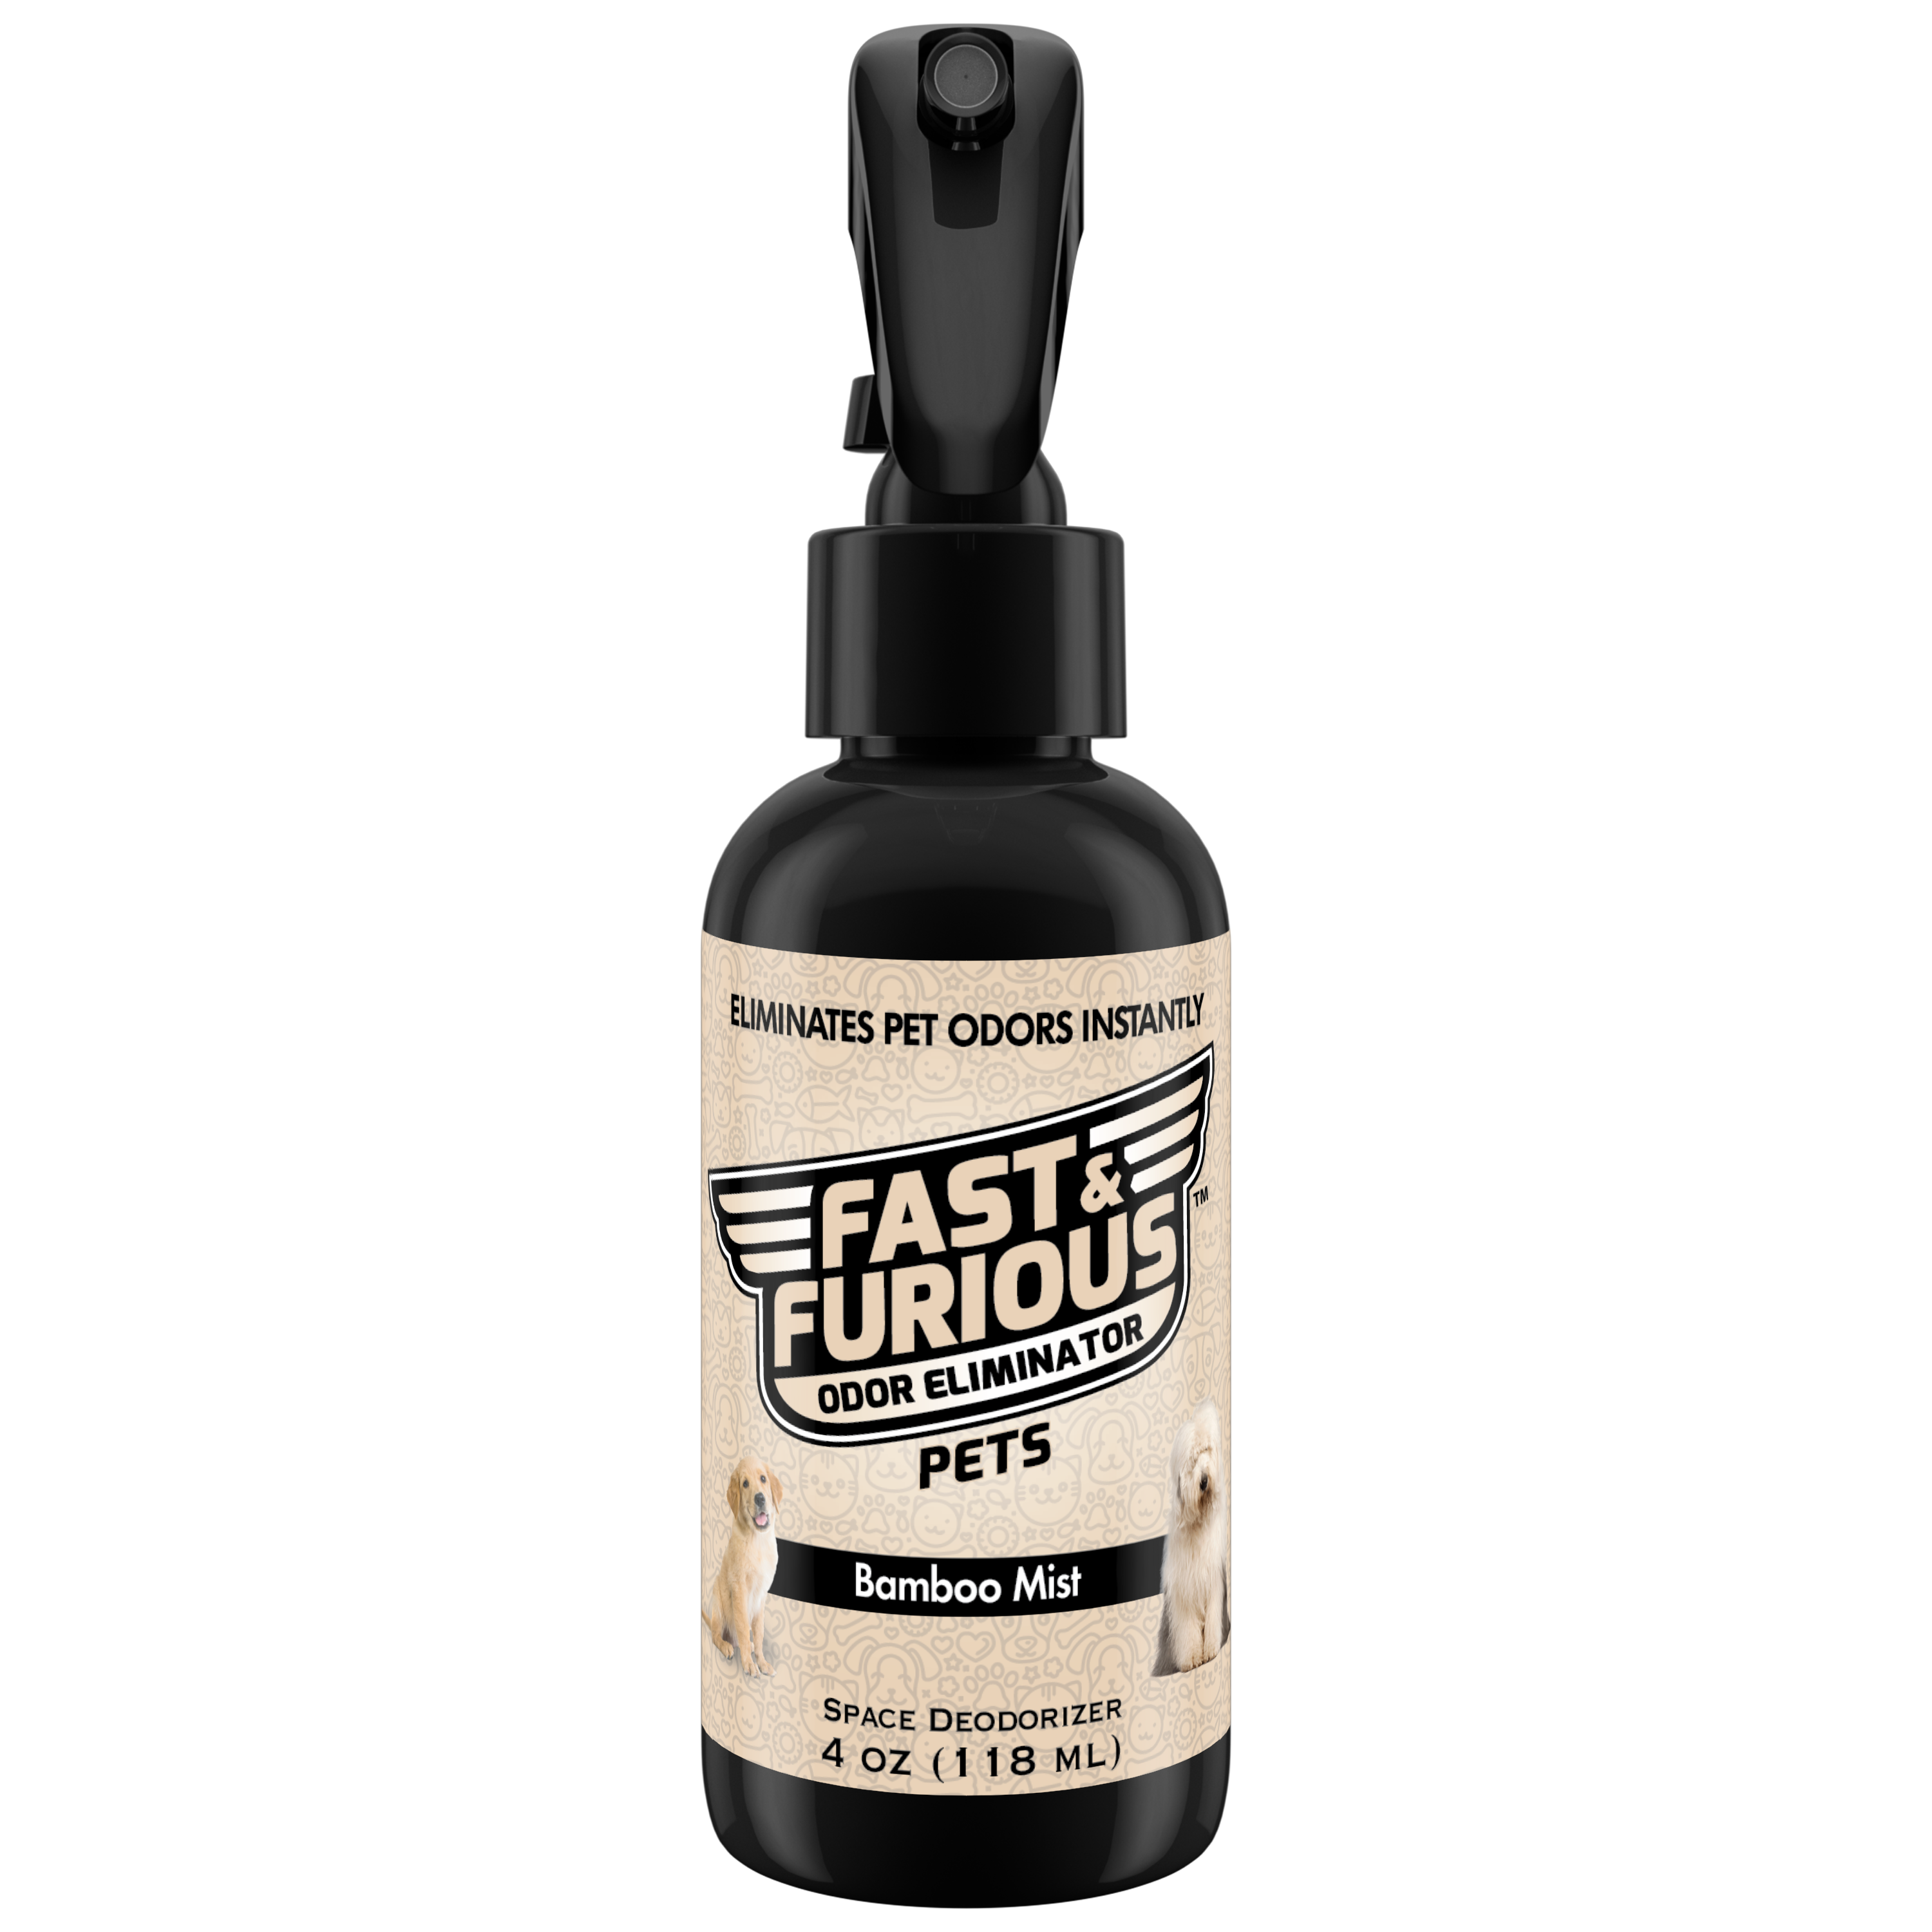 Fast and Furious Pets Odor Eliminator - Bamboo Mist Scent